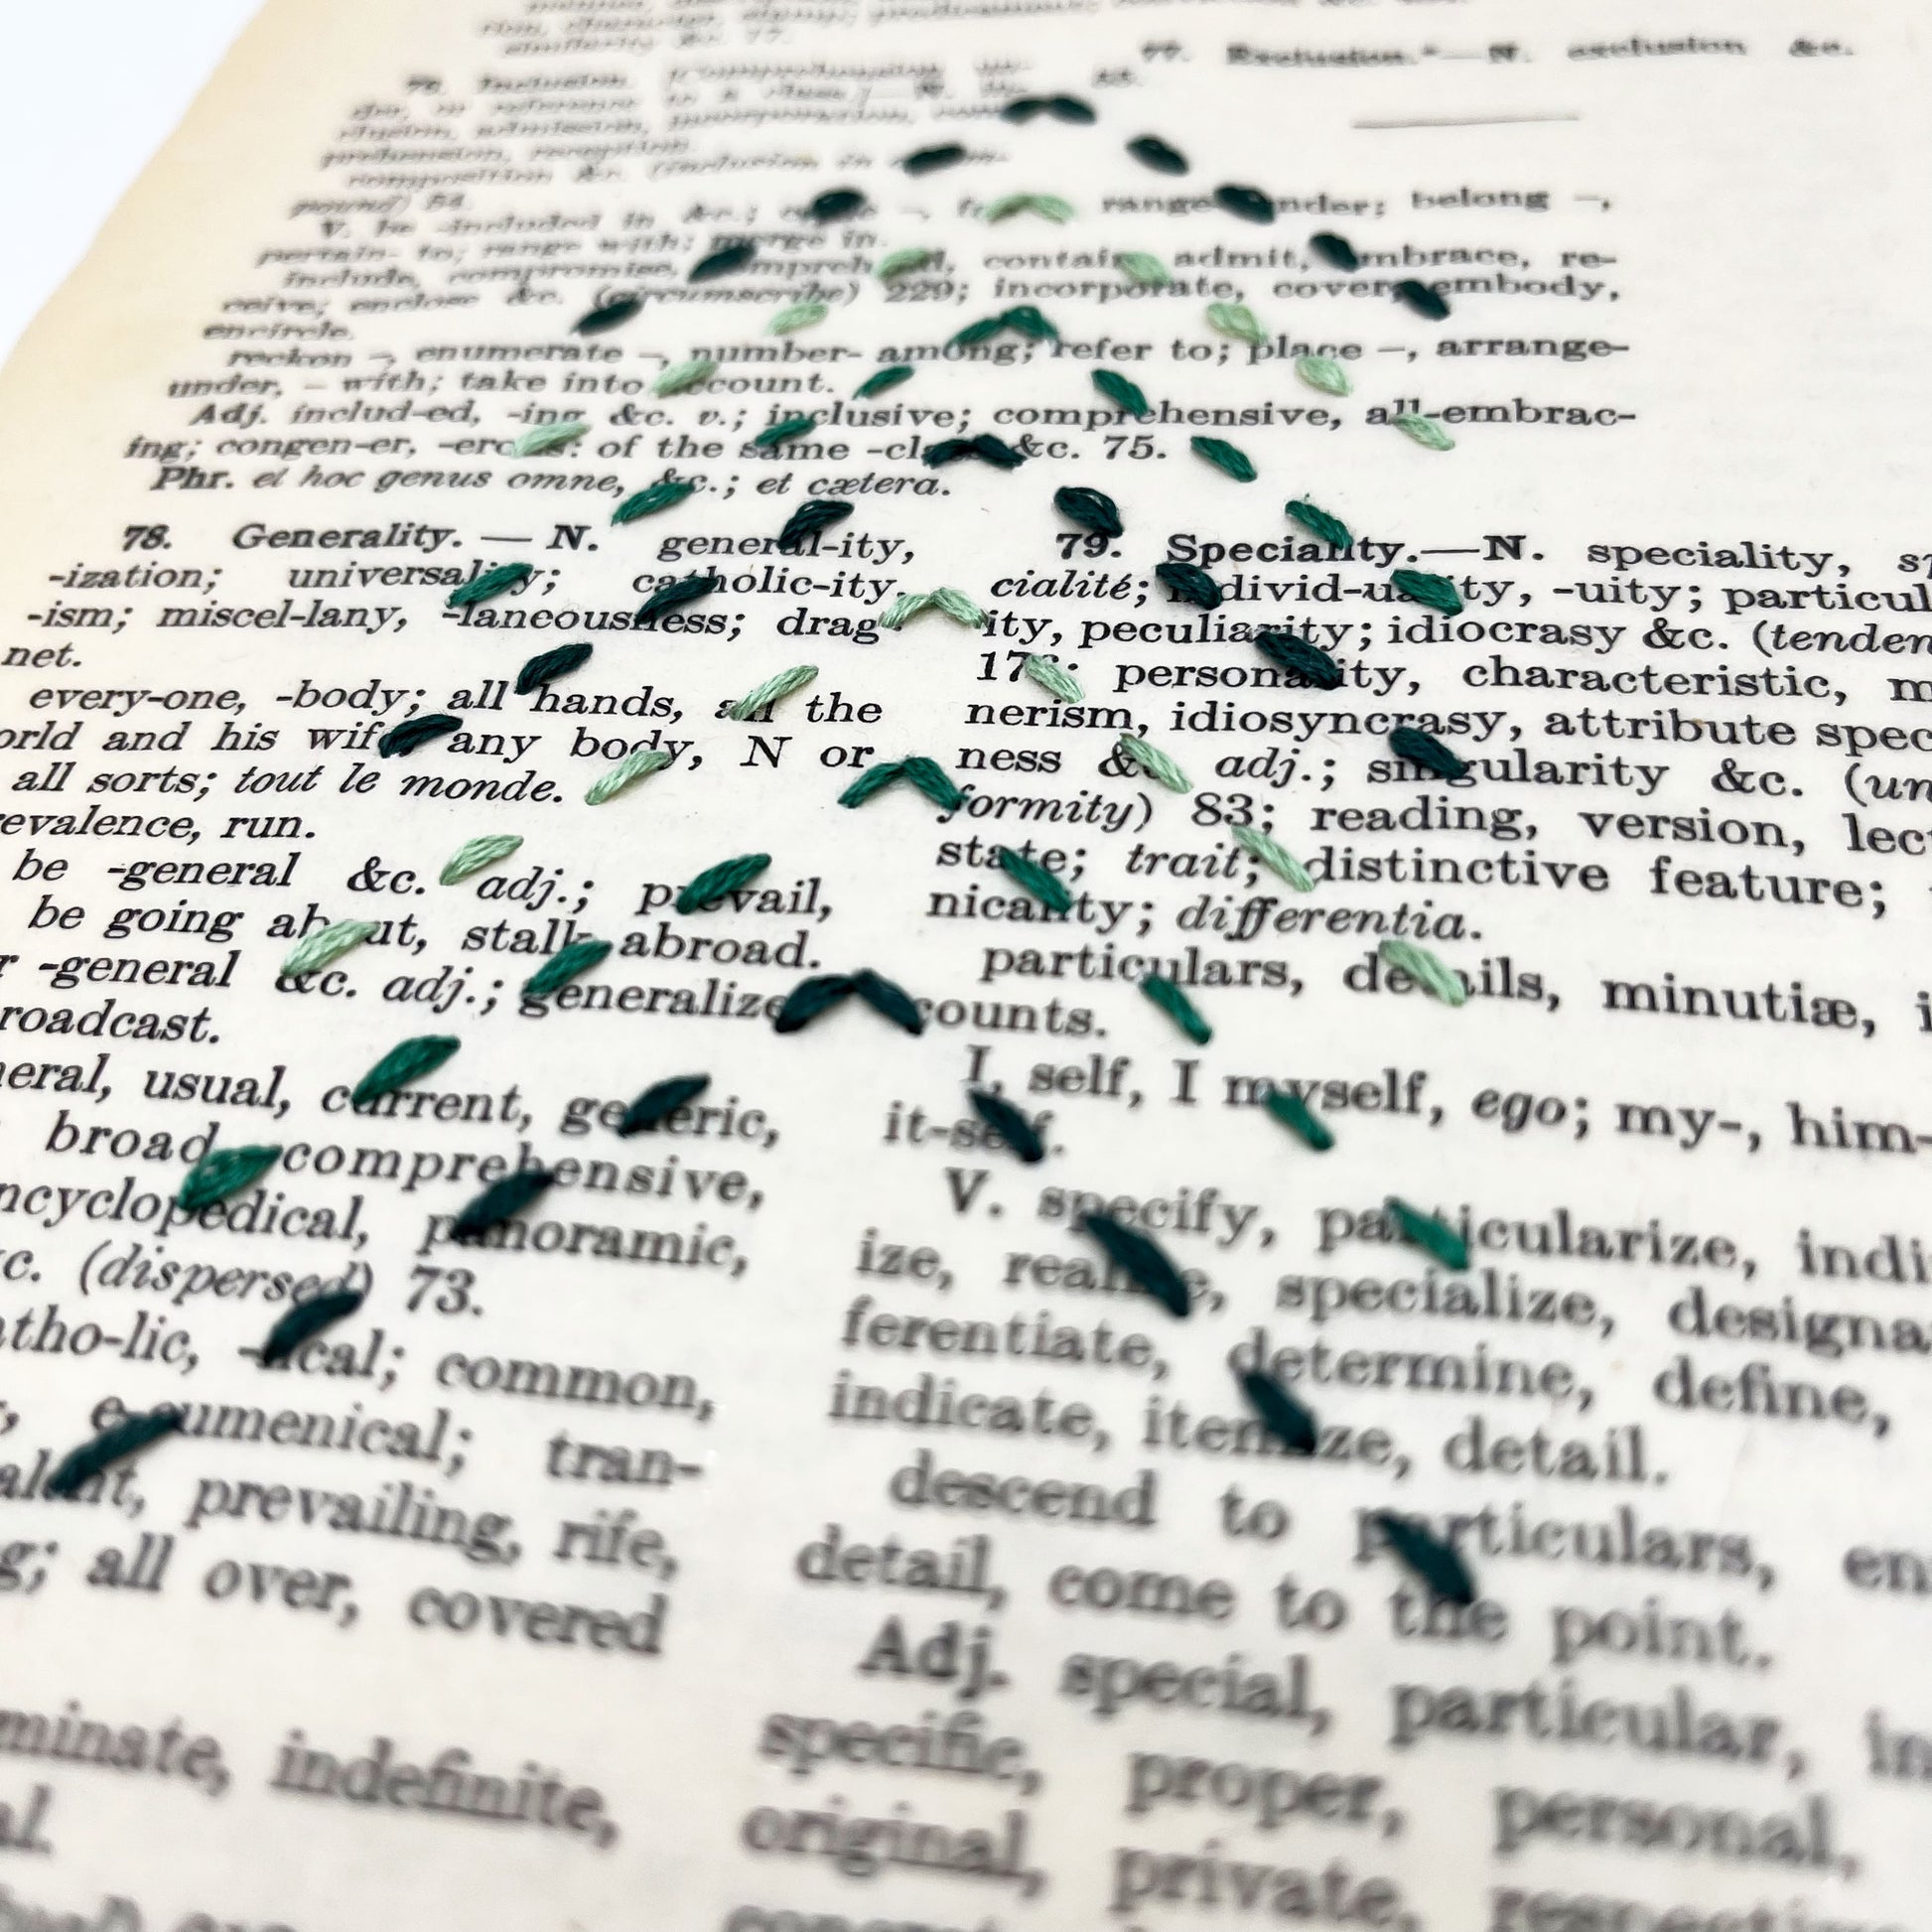 a vintage thesaurus page, embroidered with the shape of a Christmas tree made from running stitches forming a column of chevrons, in shades of pine green thread, on a white background. the page itself has words like speciality and generality on it